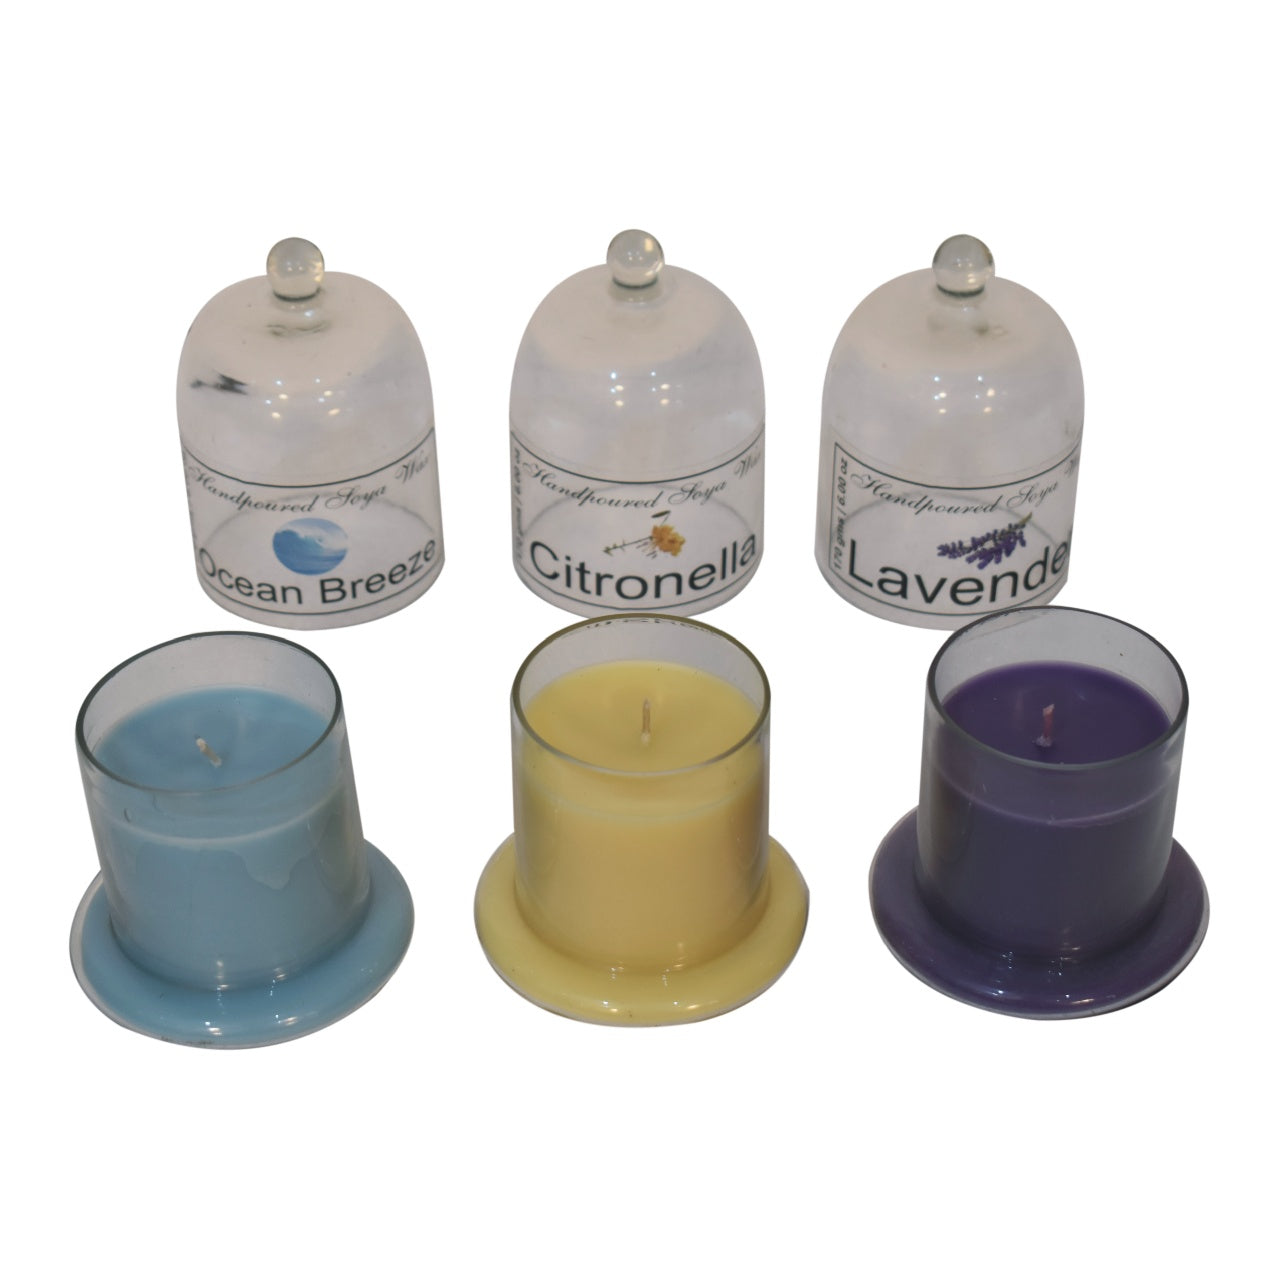 Bell Jar Candle Set of 3 (Ocean Breeze, Citronella, Lavender) - Red Ross Retail-Furniture Specialists 